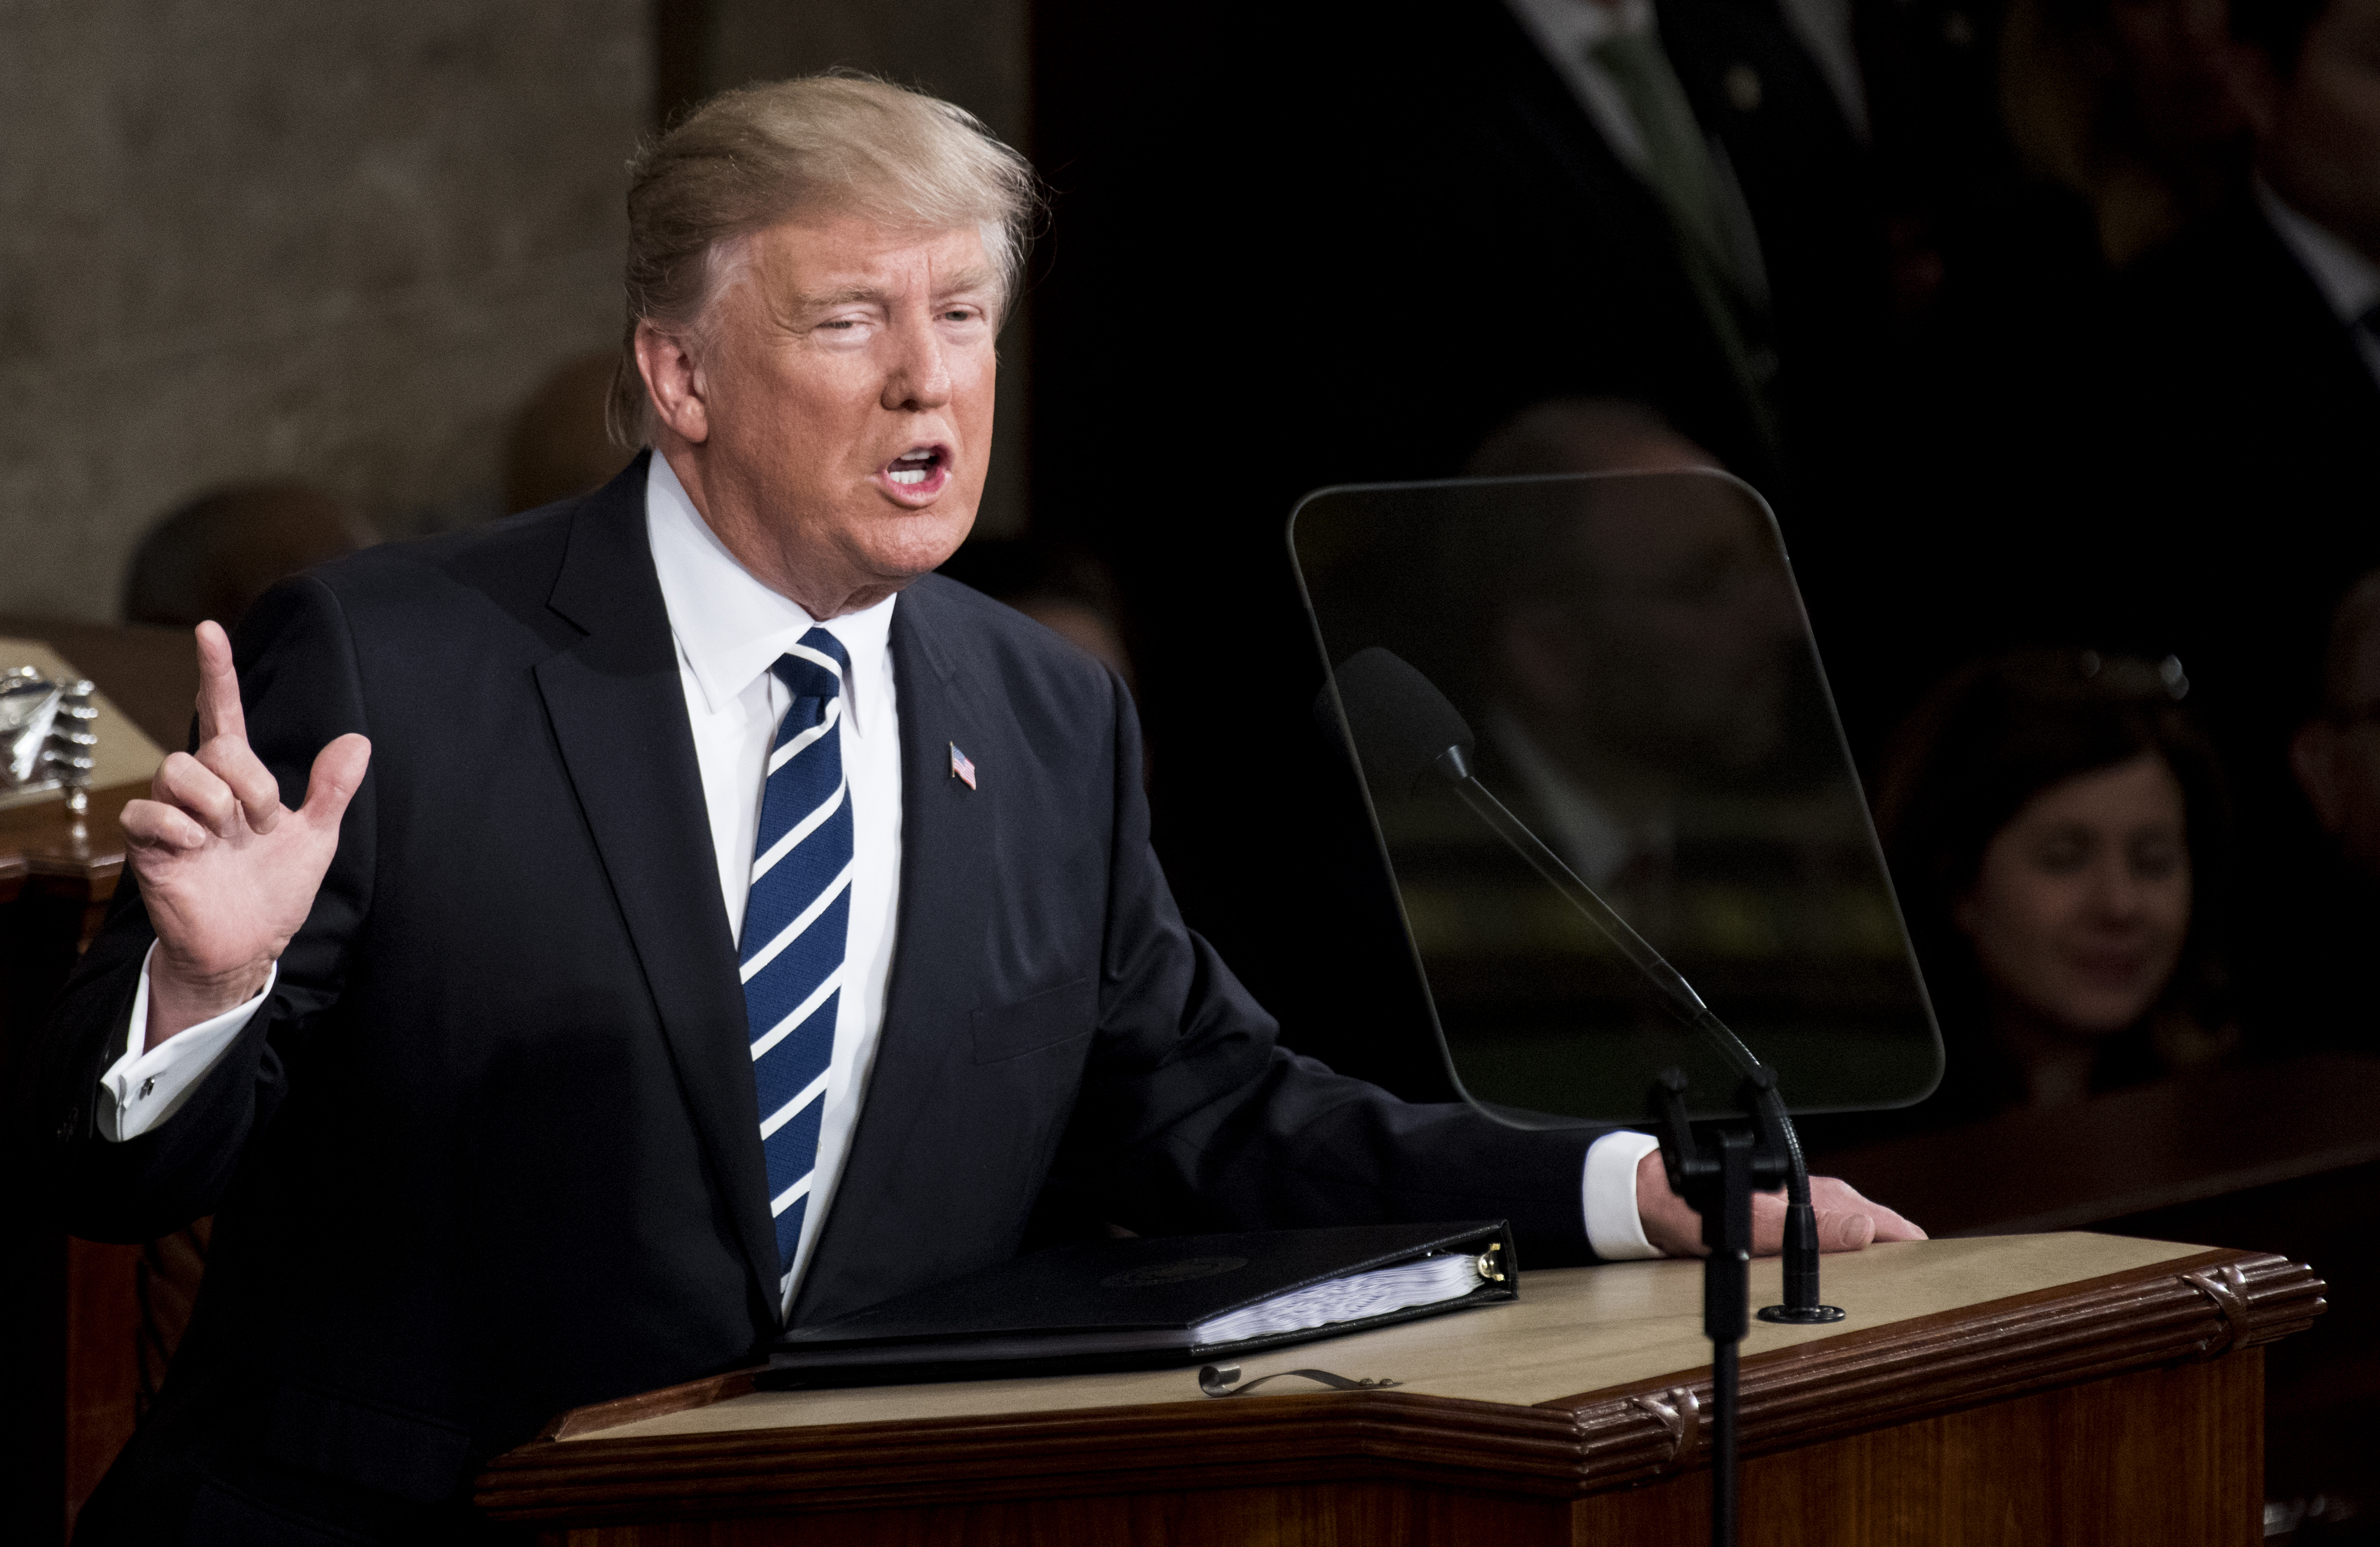 UNITED STATES - FEBRUARY 28: President Donald Trump delivers his address to a joint session of Congress on Tuesday, Feb. 28, 2017. (Bill Clark—CQ Roll Call/Getty Images)